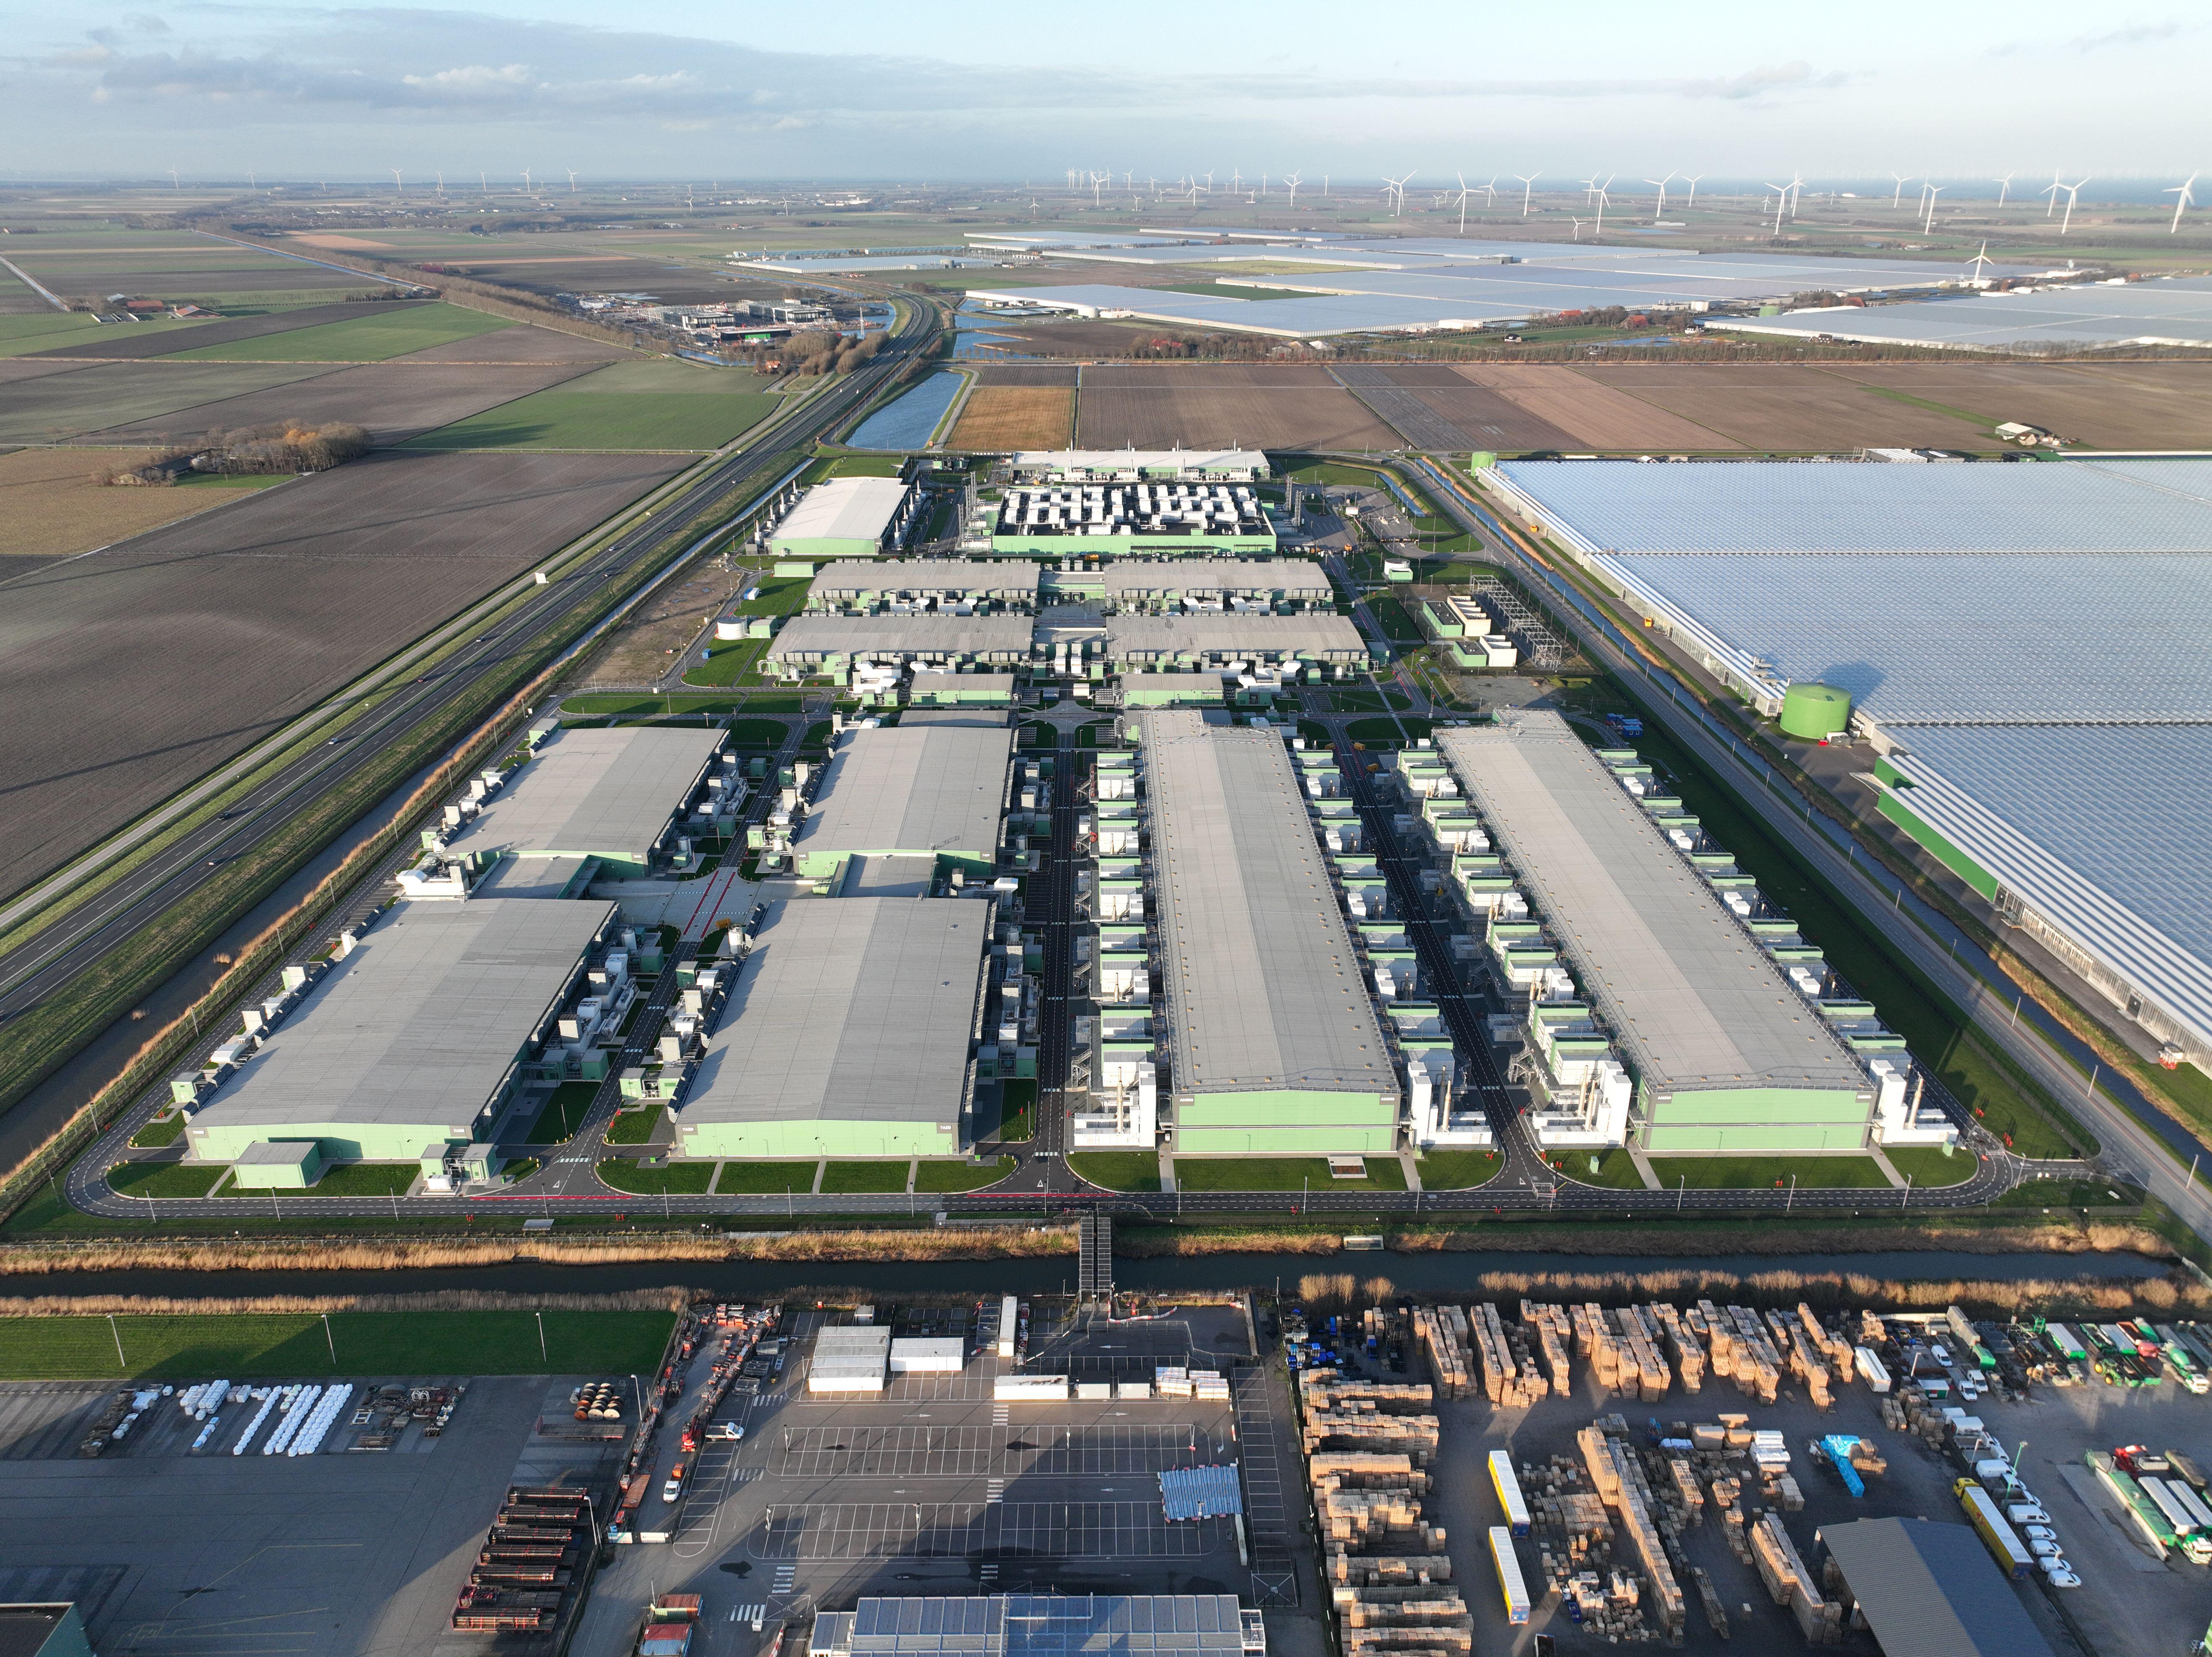 Drone view of Microsoft Agriport cloud datacenter in Hollands Kroon taken on January 8, 2023.